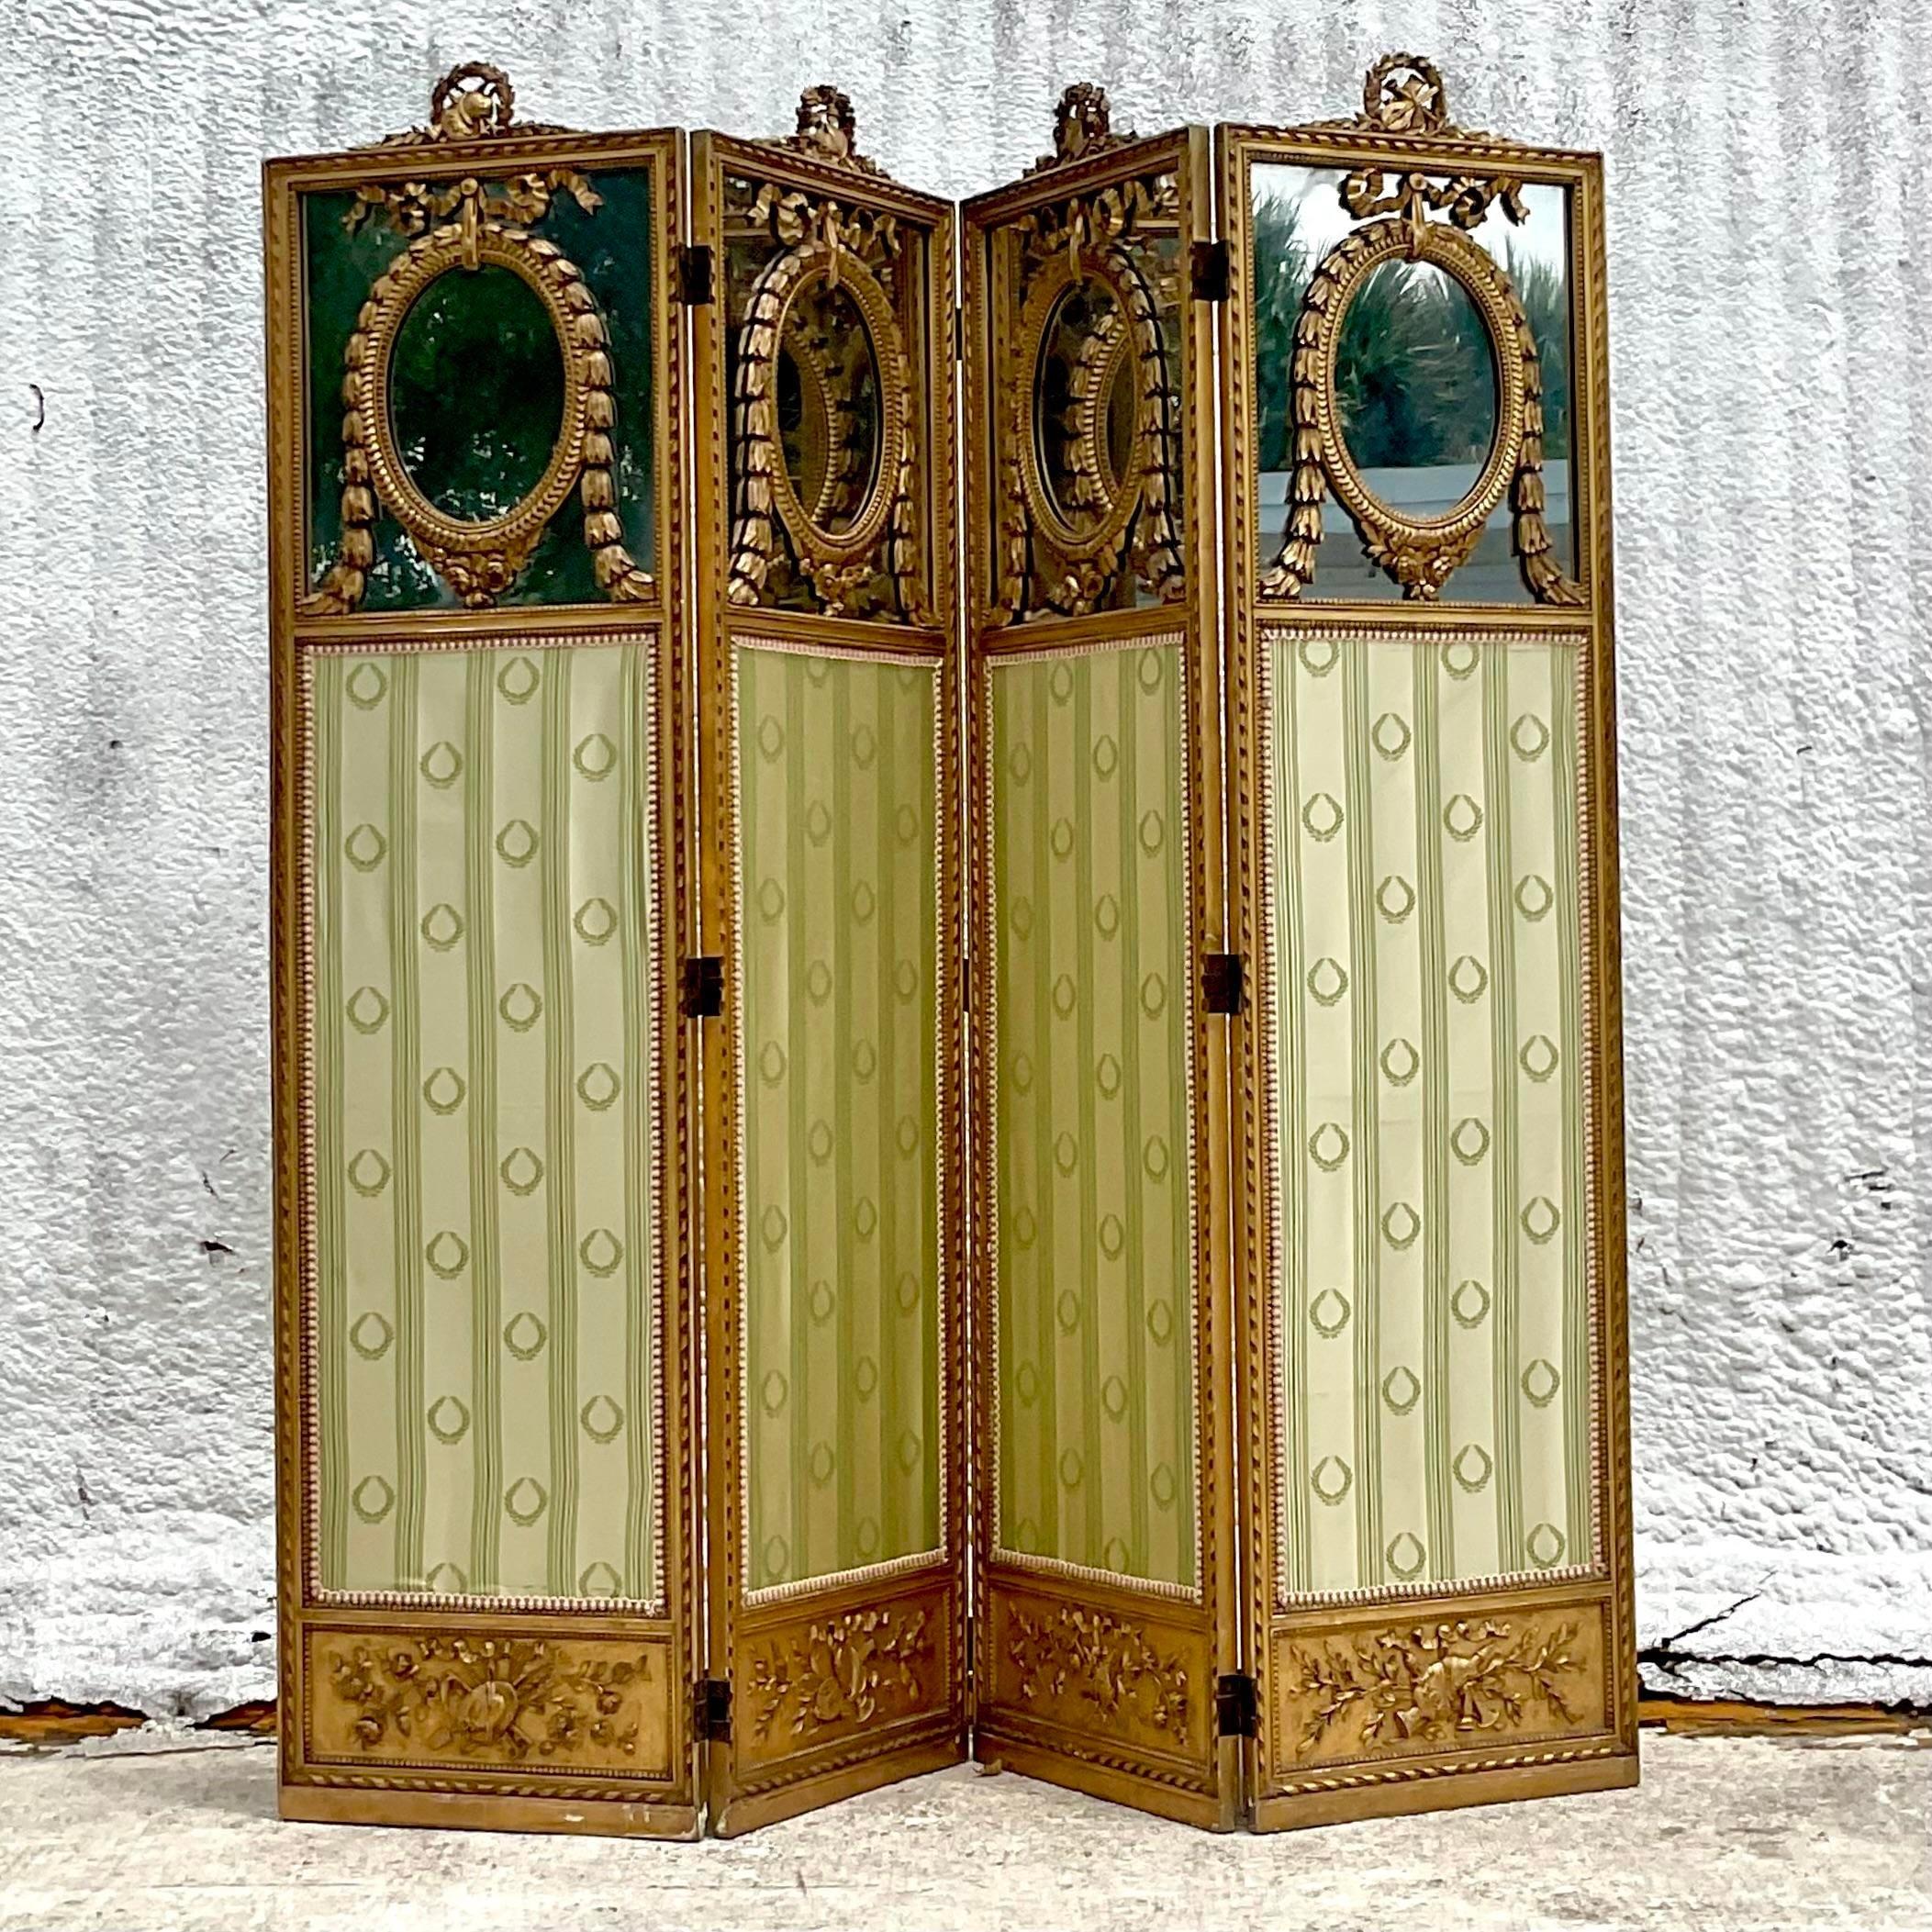 A fabulous 19th Century vintage folding screen. Stunning carved swag detail and inset silk jacquard panels. A wreath of laurels with a mirrored panel at the top. Acquired from a Palm Beach estate.